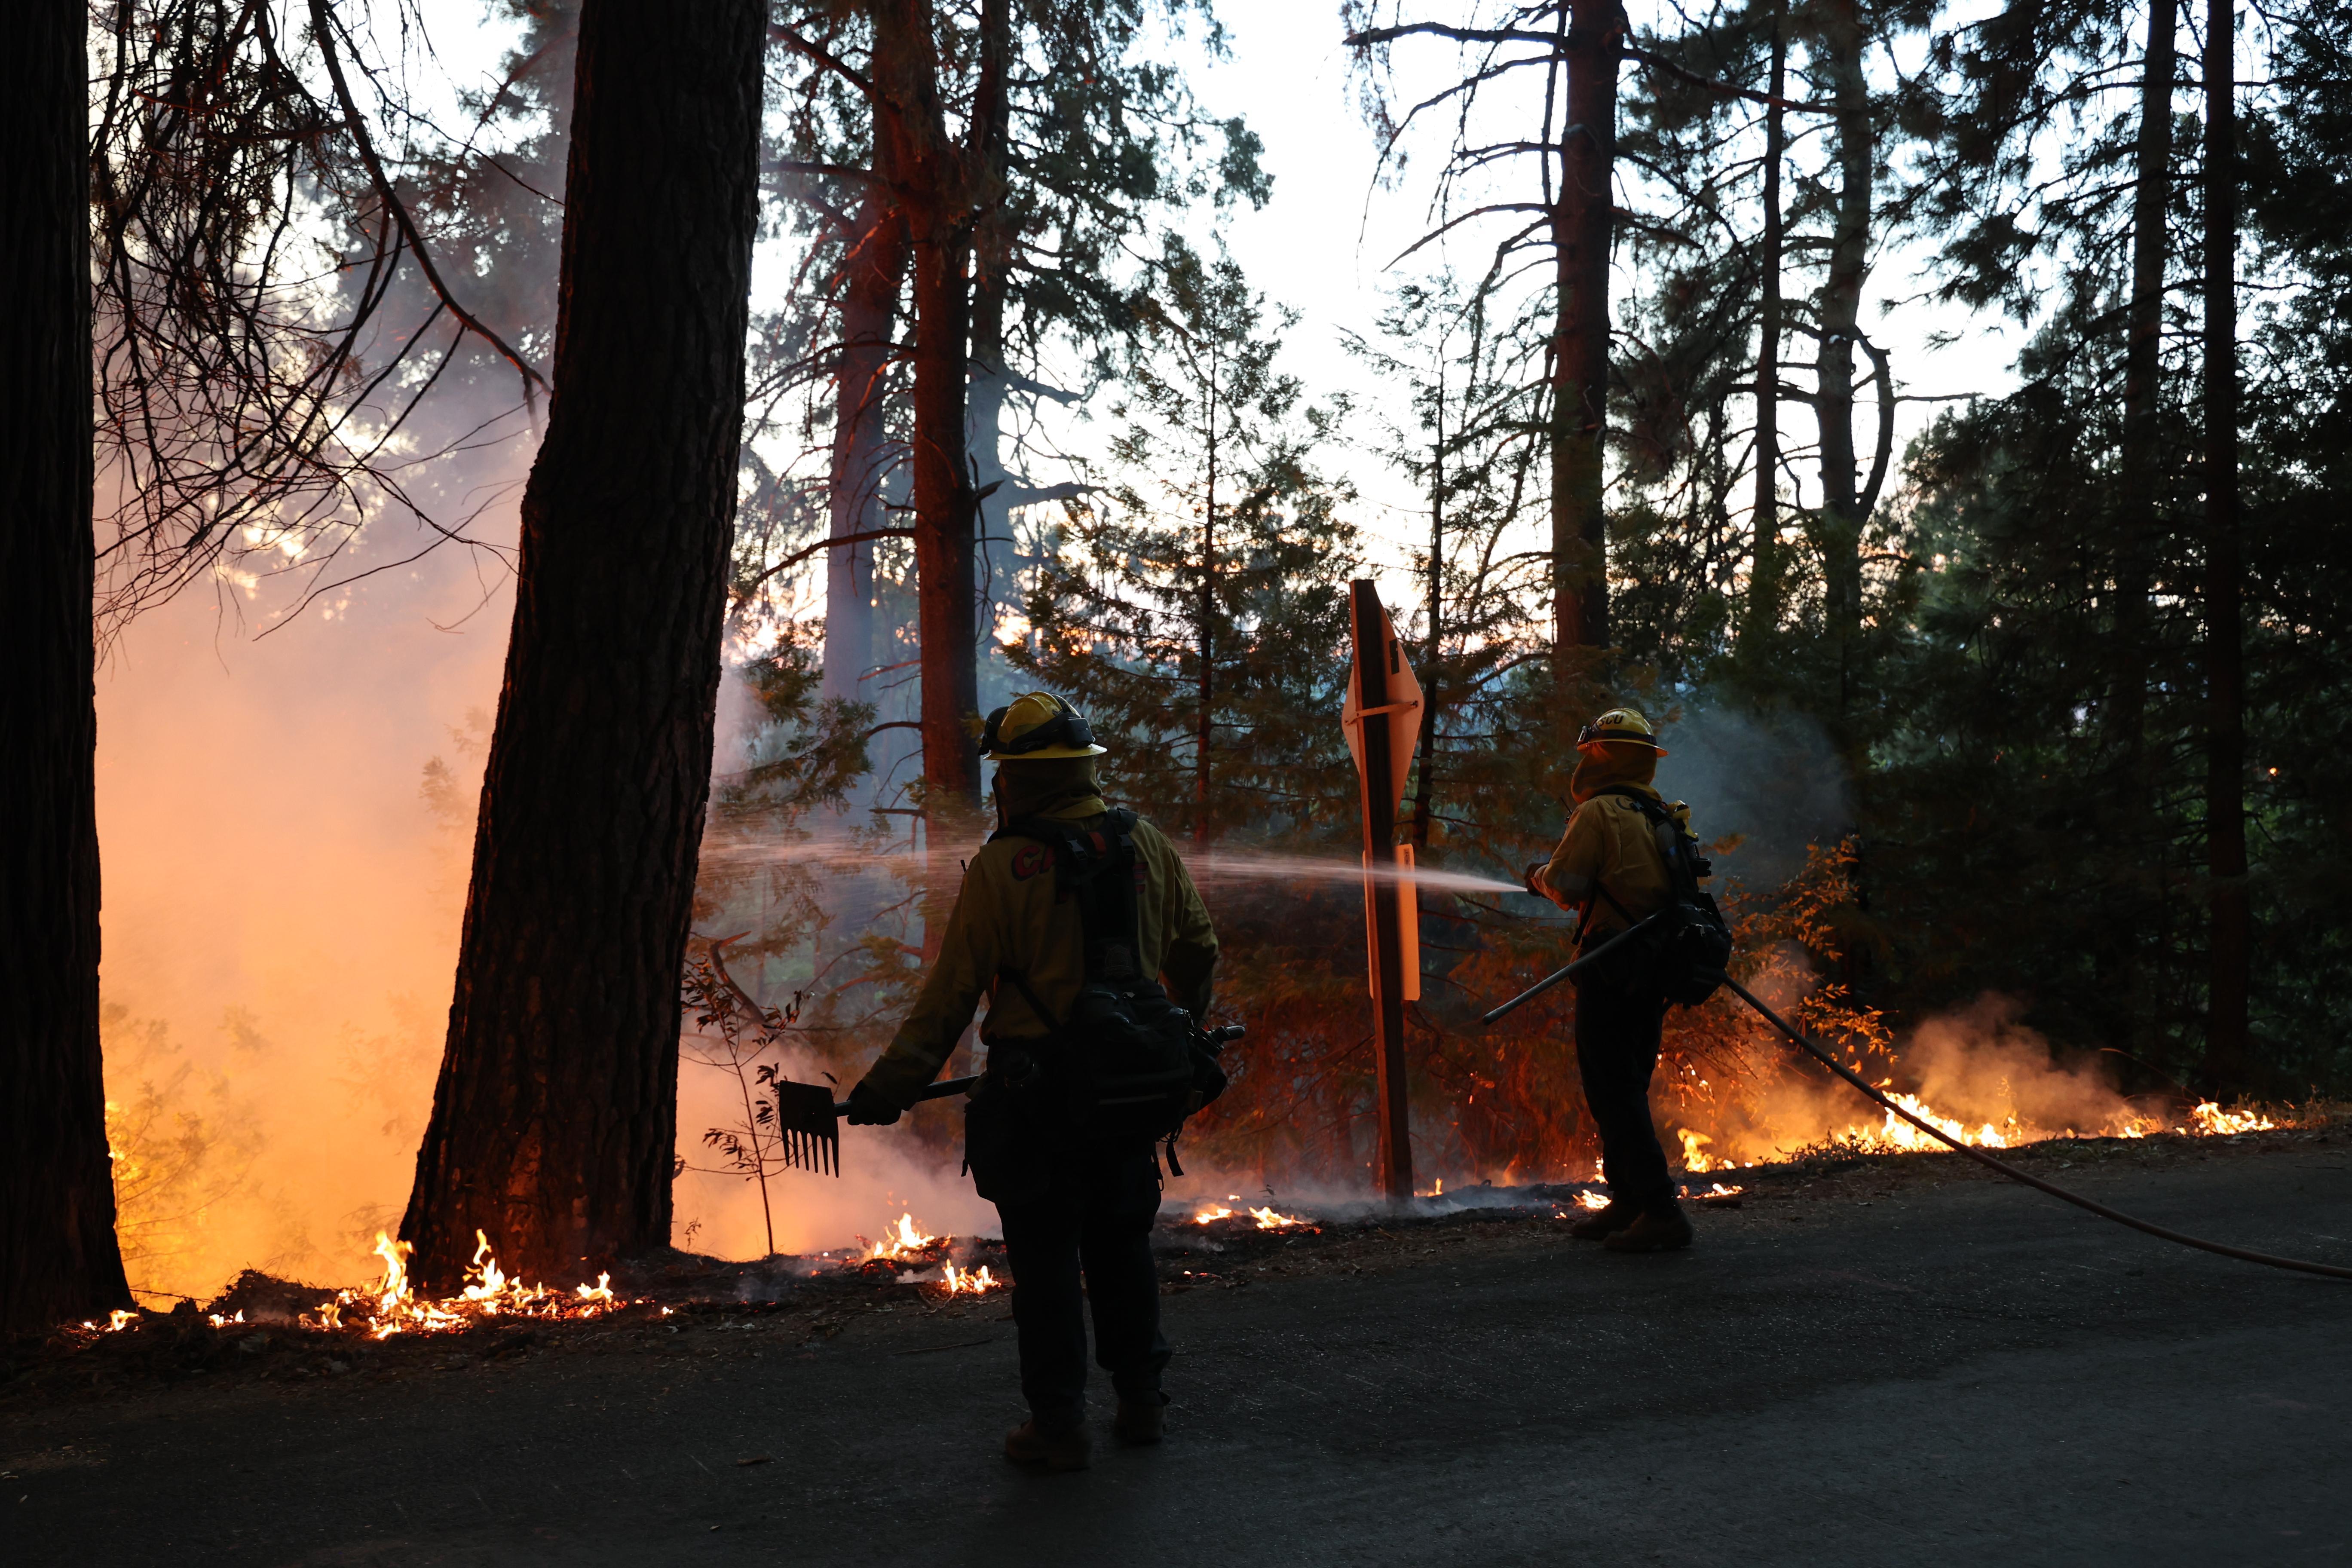 At dusk, 2 male firefighters stand on the edge of a road with hose and tools. The trees and brush go up to the road and are burning with flames taller than the men.